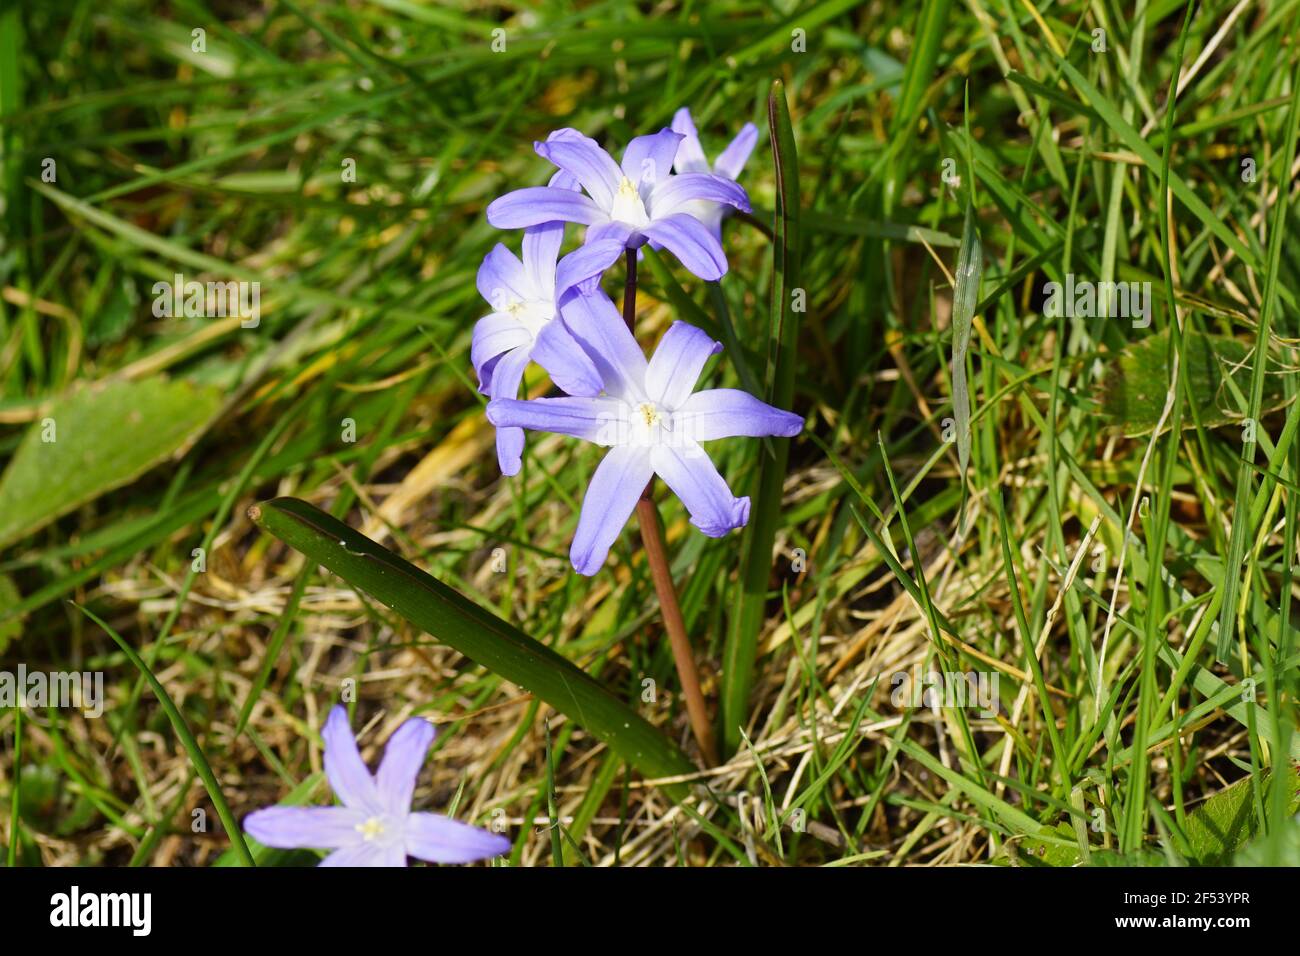 Flowering Glory of the Snow (Chionodoxa luciliae), subfamily Scilloideae, family Asparagaceae. Between faded leaves of grass, snowdrops and crocuses. Stock Photo